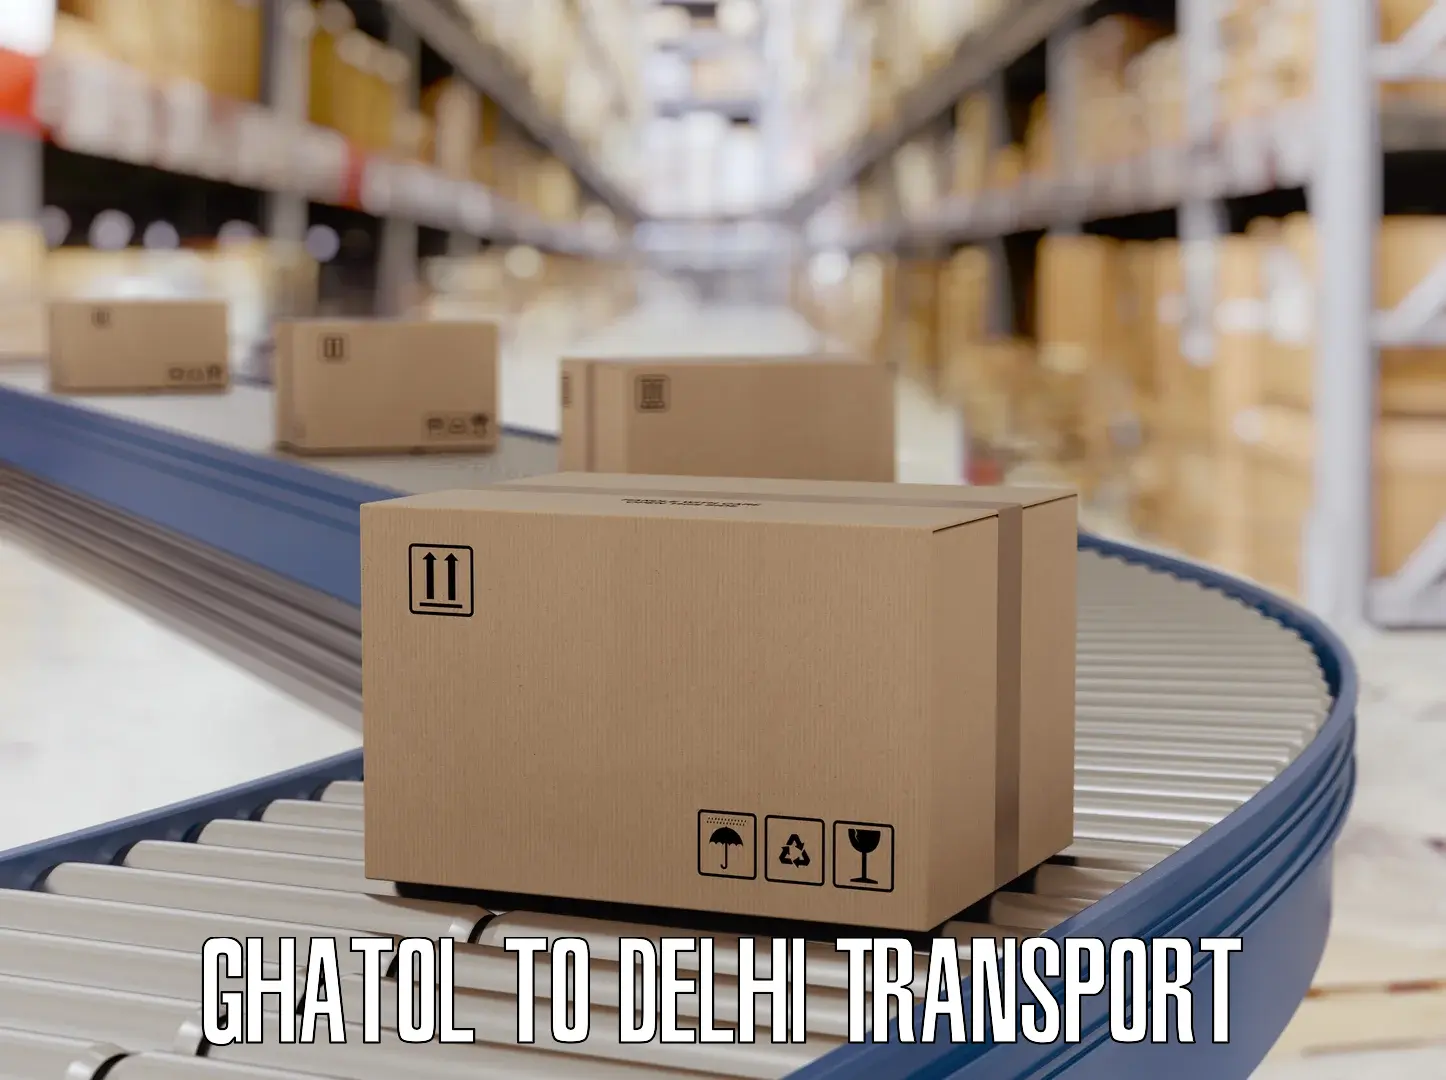 Transport bike from one state to another Ghatol to Delhi